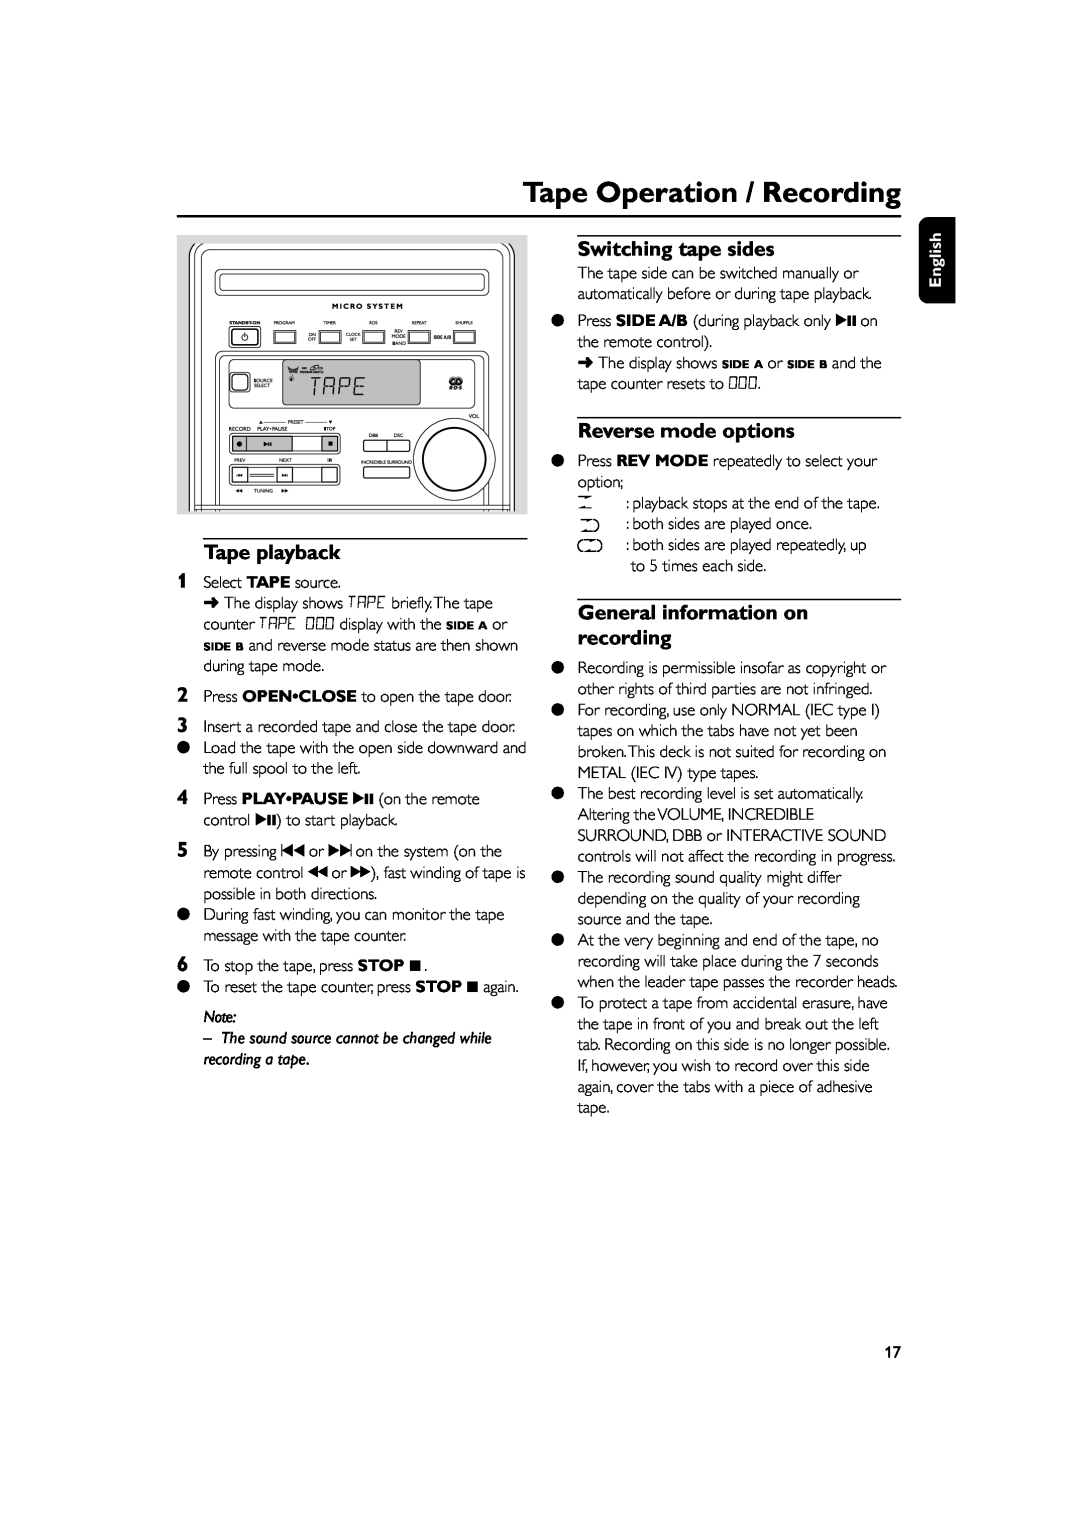 Philips MC270 user manual Tape Operation / Recording, Switching tape sides, Reverse mode options, Tape playback, English 